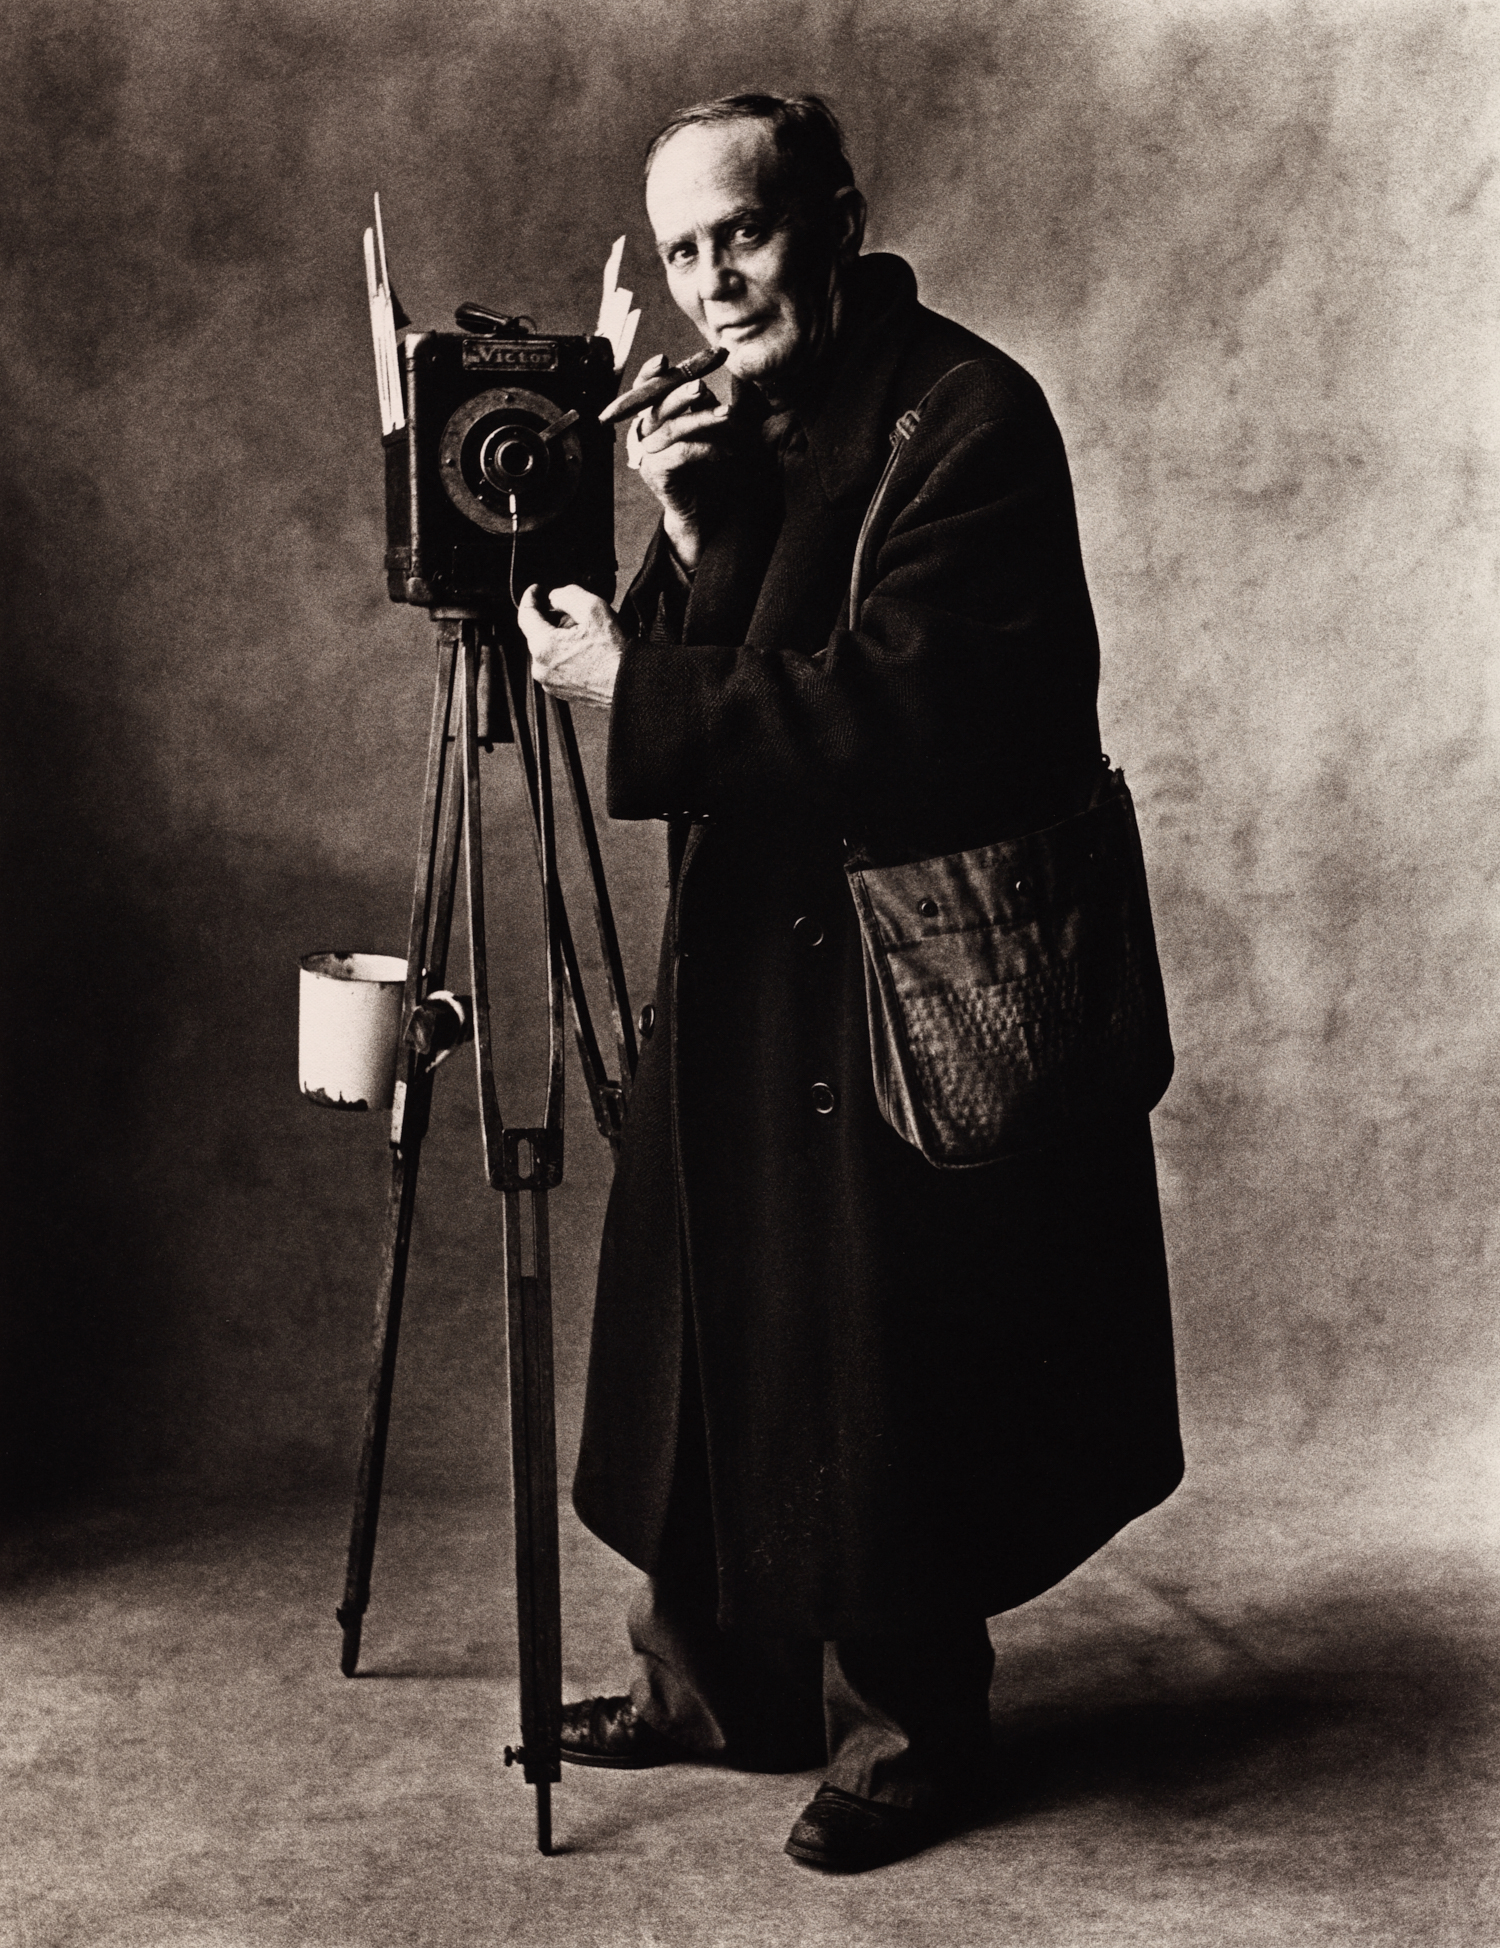 Small Trades — The Irving Penn Foundation